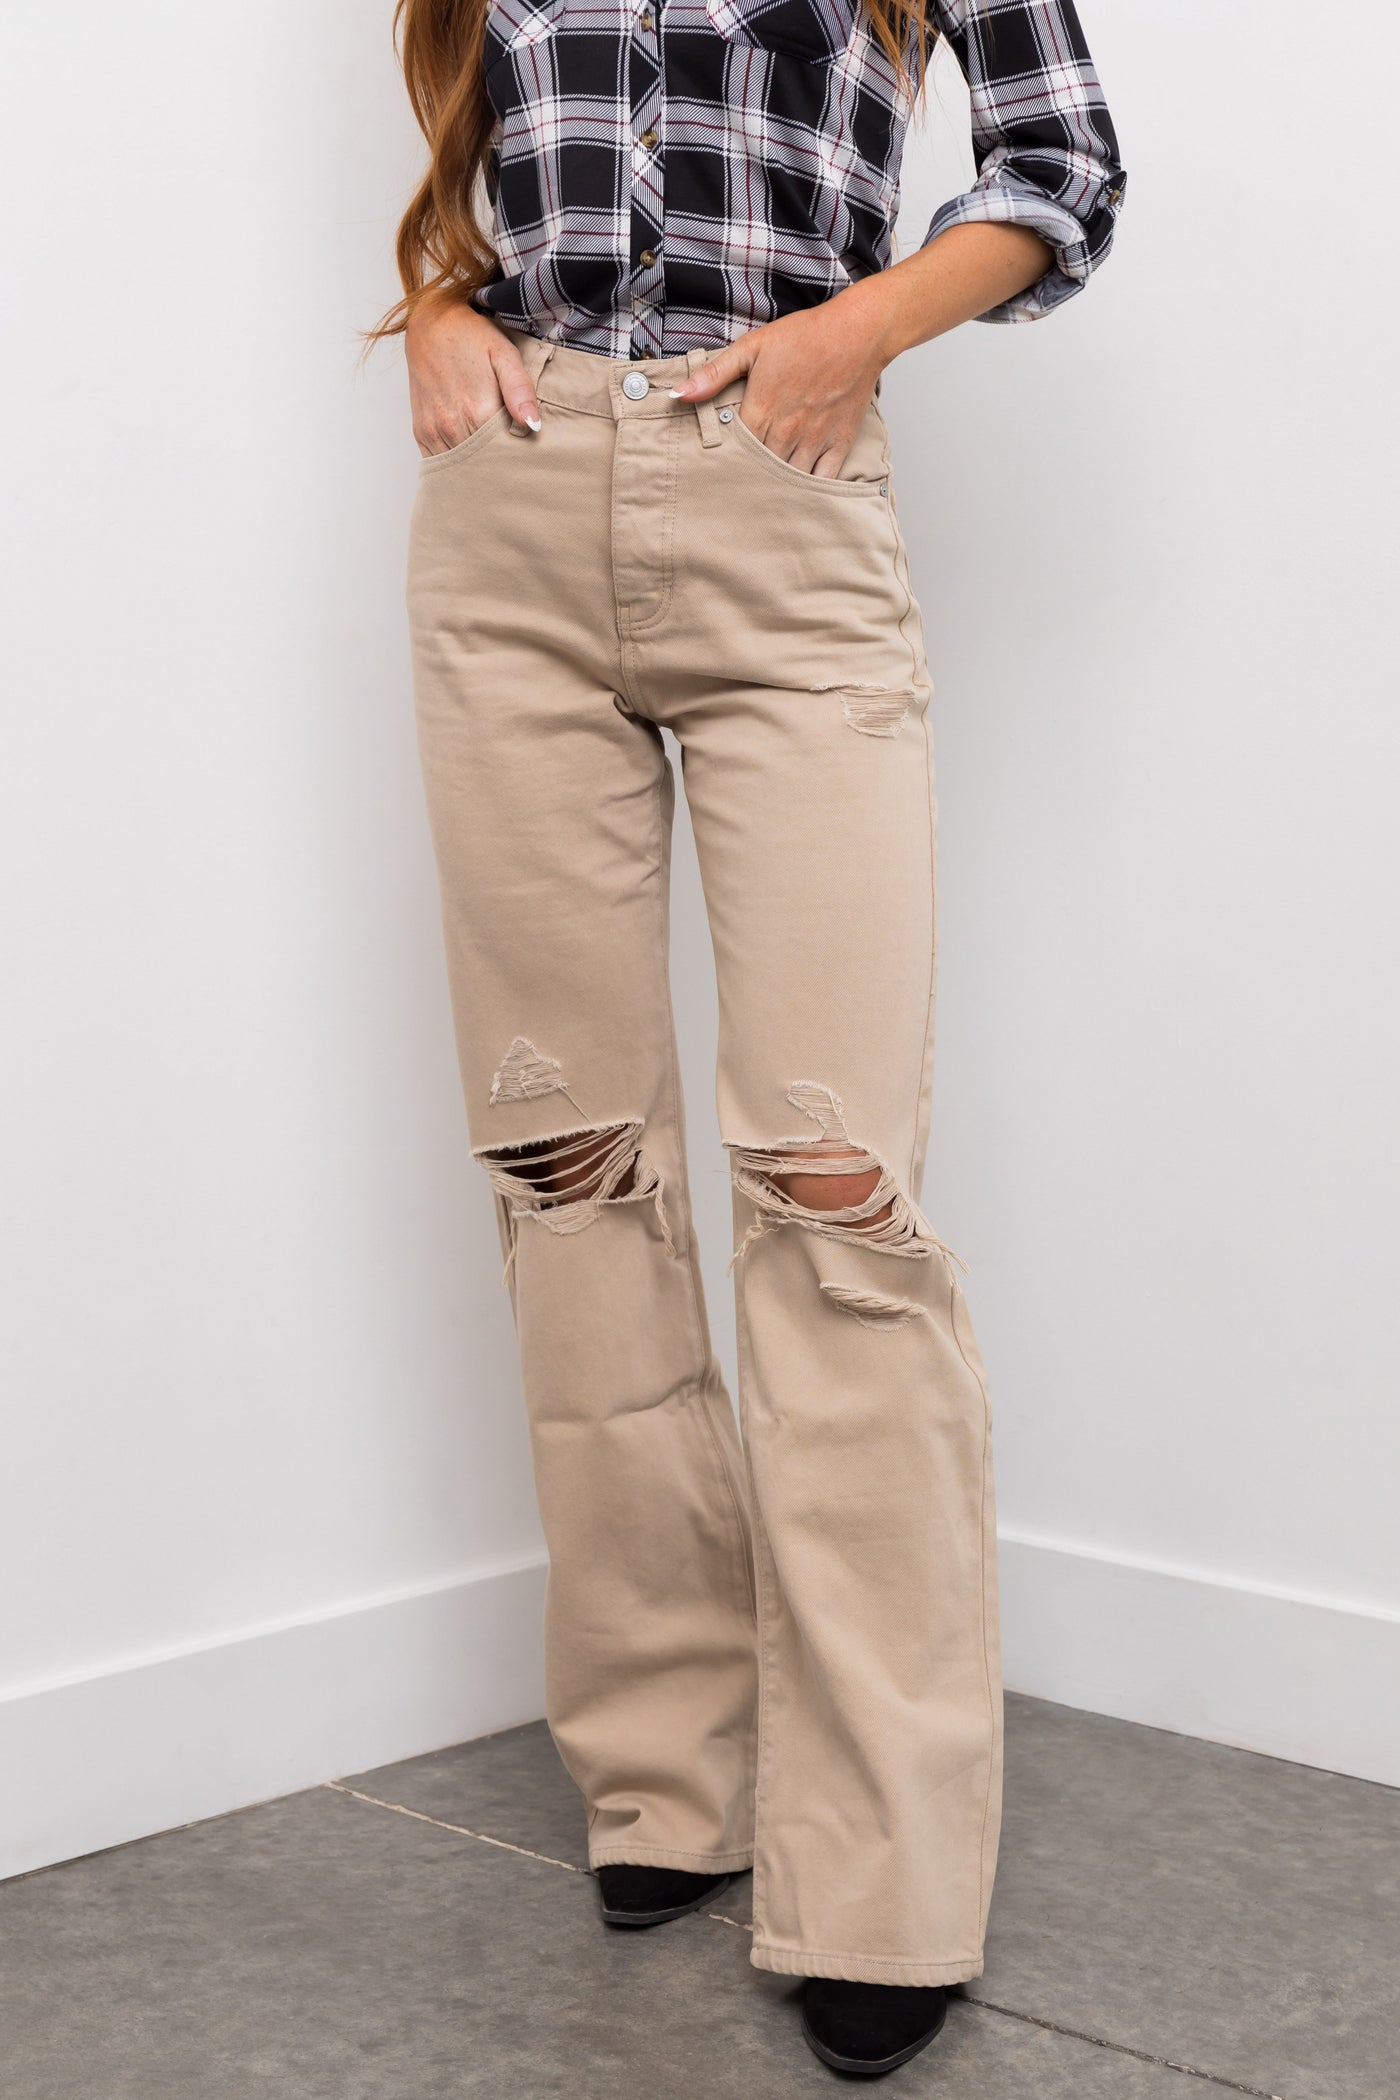 KanCan Beige High Rise Distressed 90's Flare Jeans